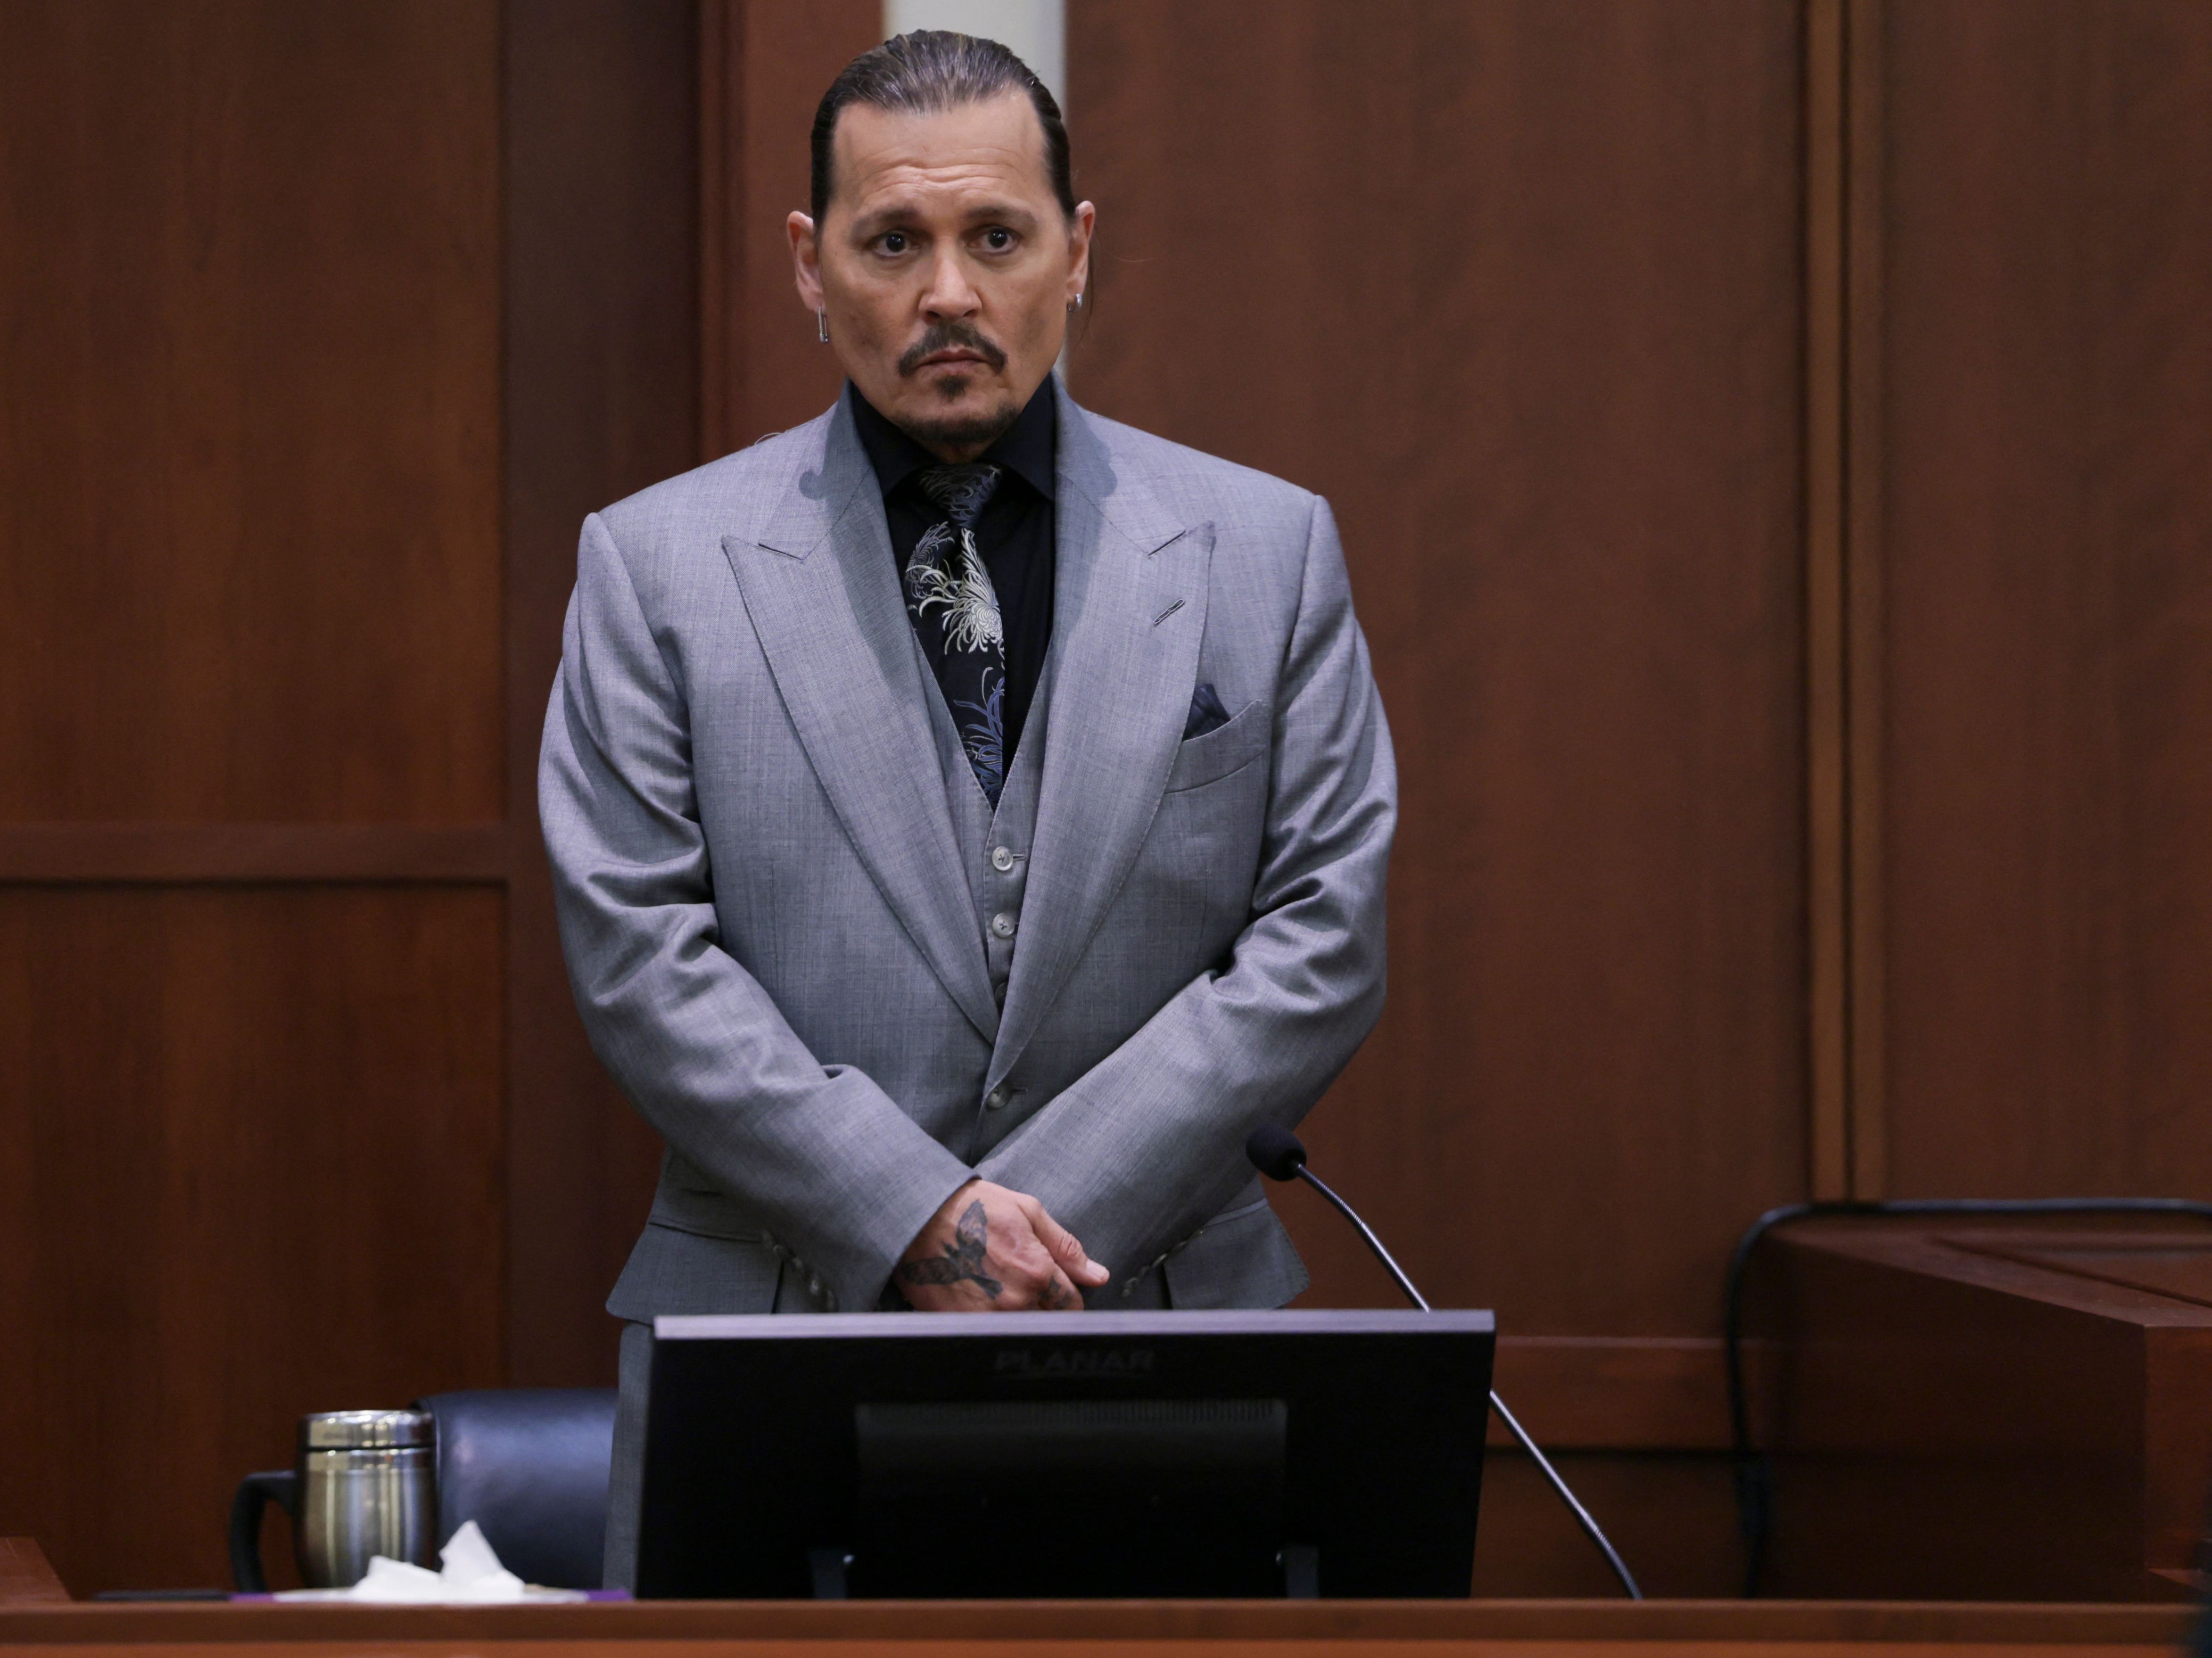 Johnny Depp during his defamation trial against Amber Heard at the Fairfax County Courthouse in Fairfax, Virginia on 20 April 2022